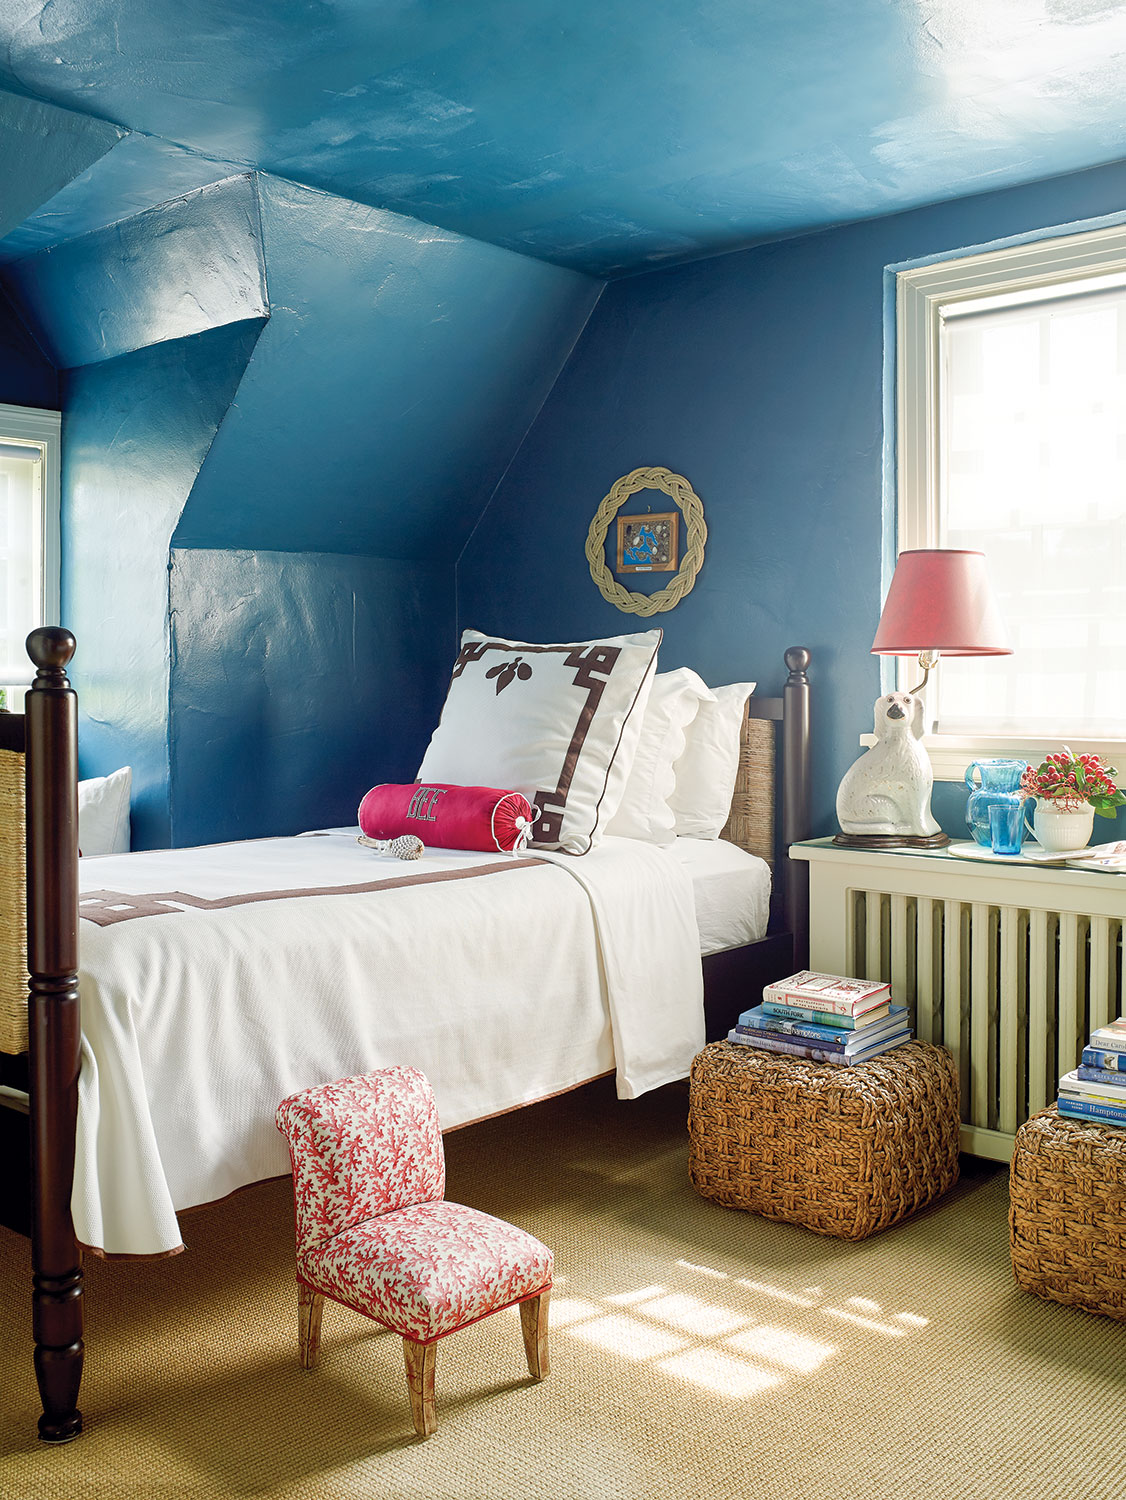 Guest room walls in Benjamin Moore’s Galapagos Turquoise in a high-gloss finish.